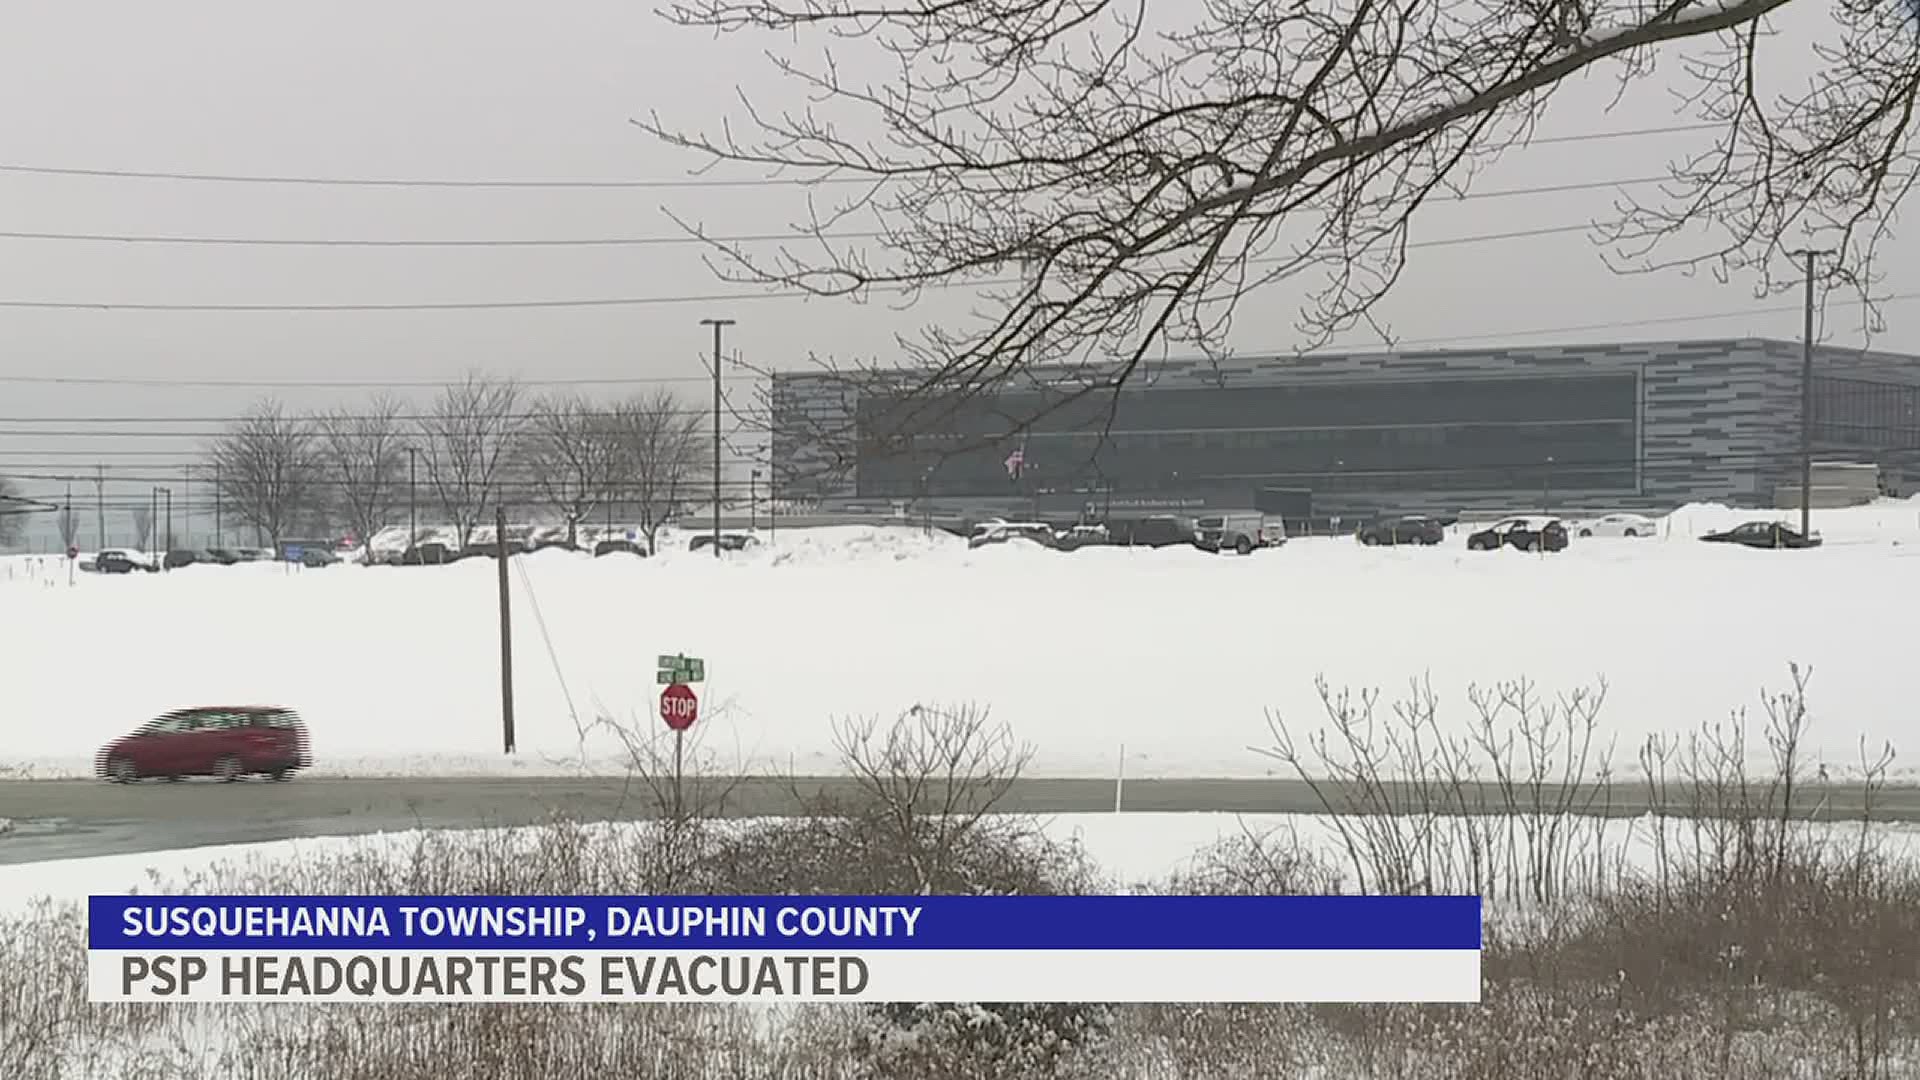 The State Police headquarters in Harrisburg was evacuated after the facility received a bomb threat.